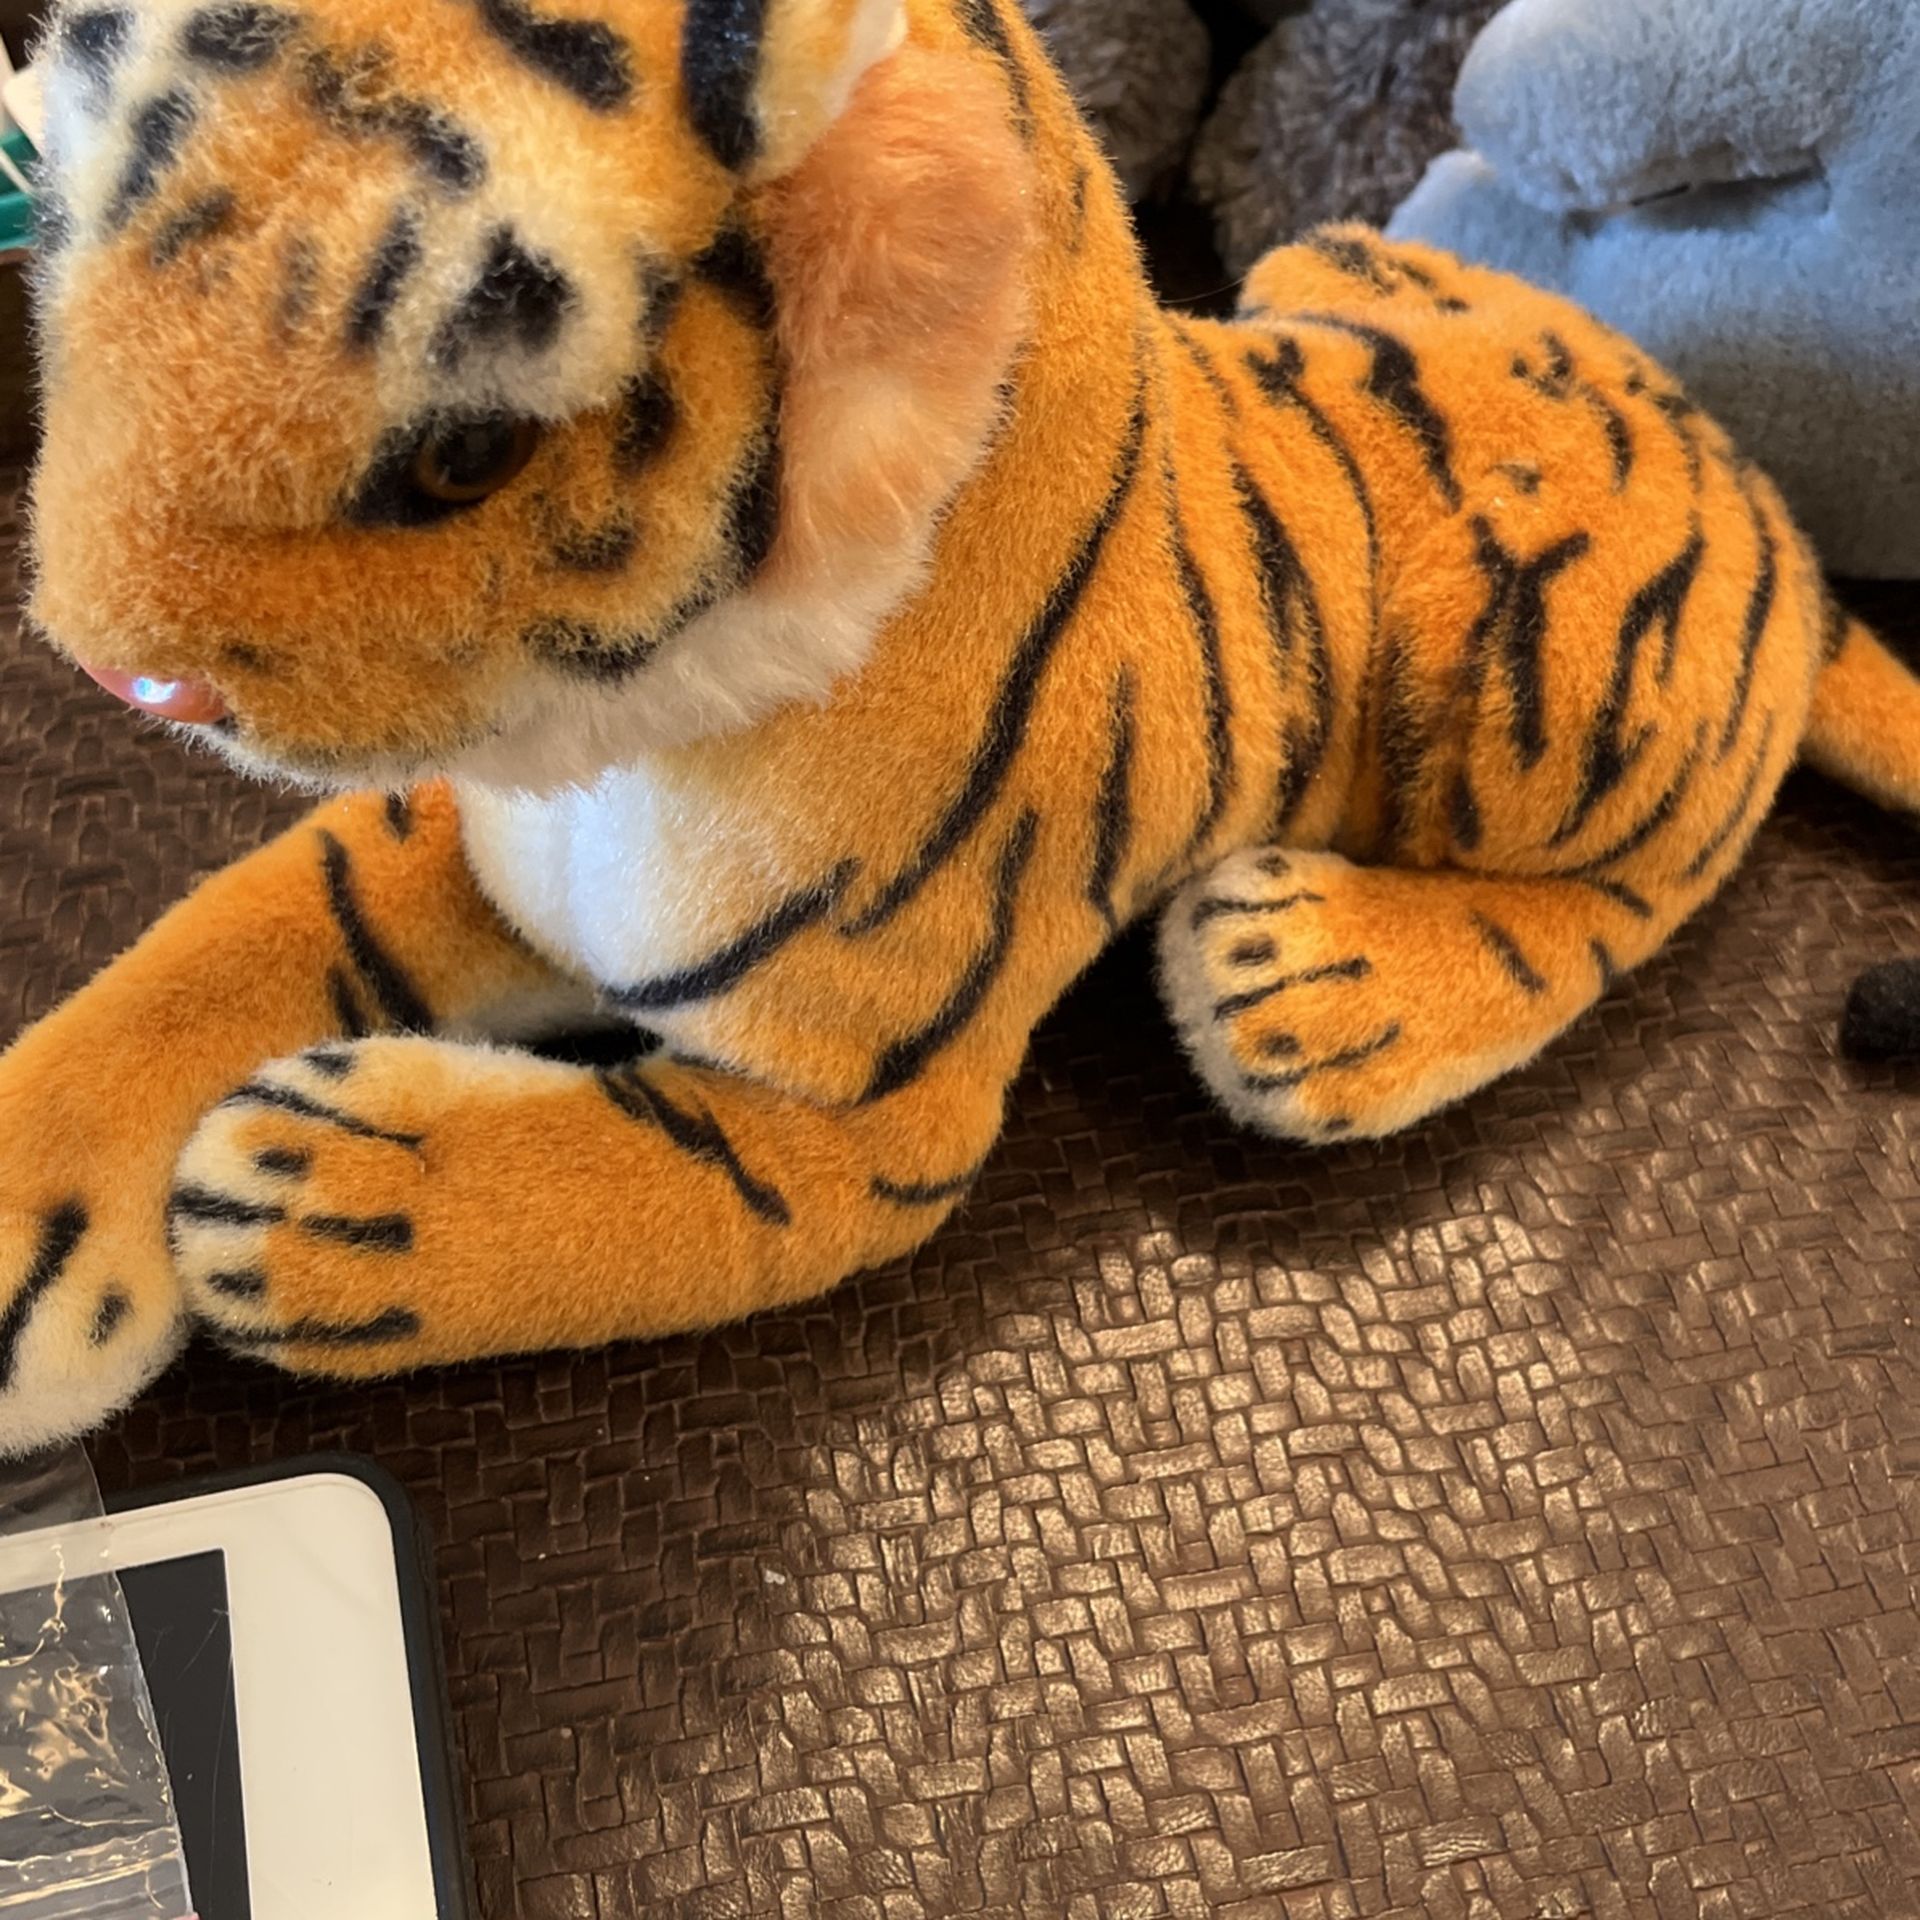 Tiger Plush Stuffed Animal by Toy Works 18"